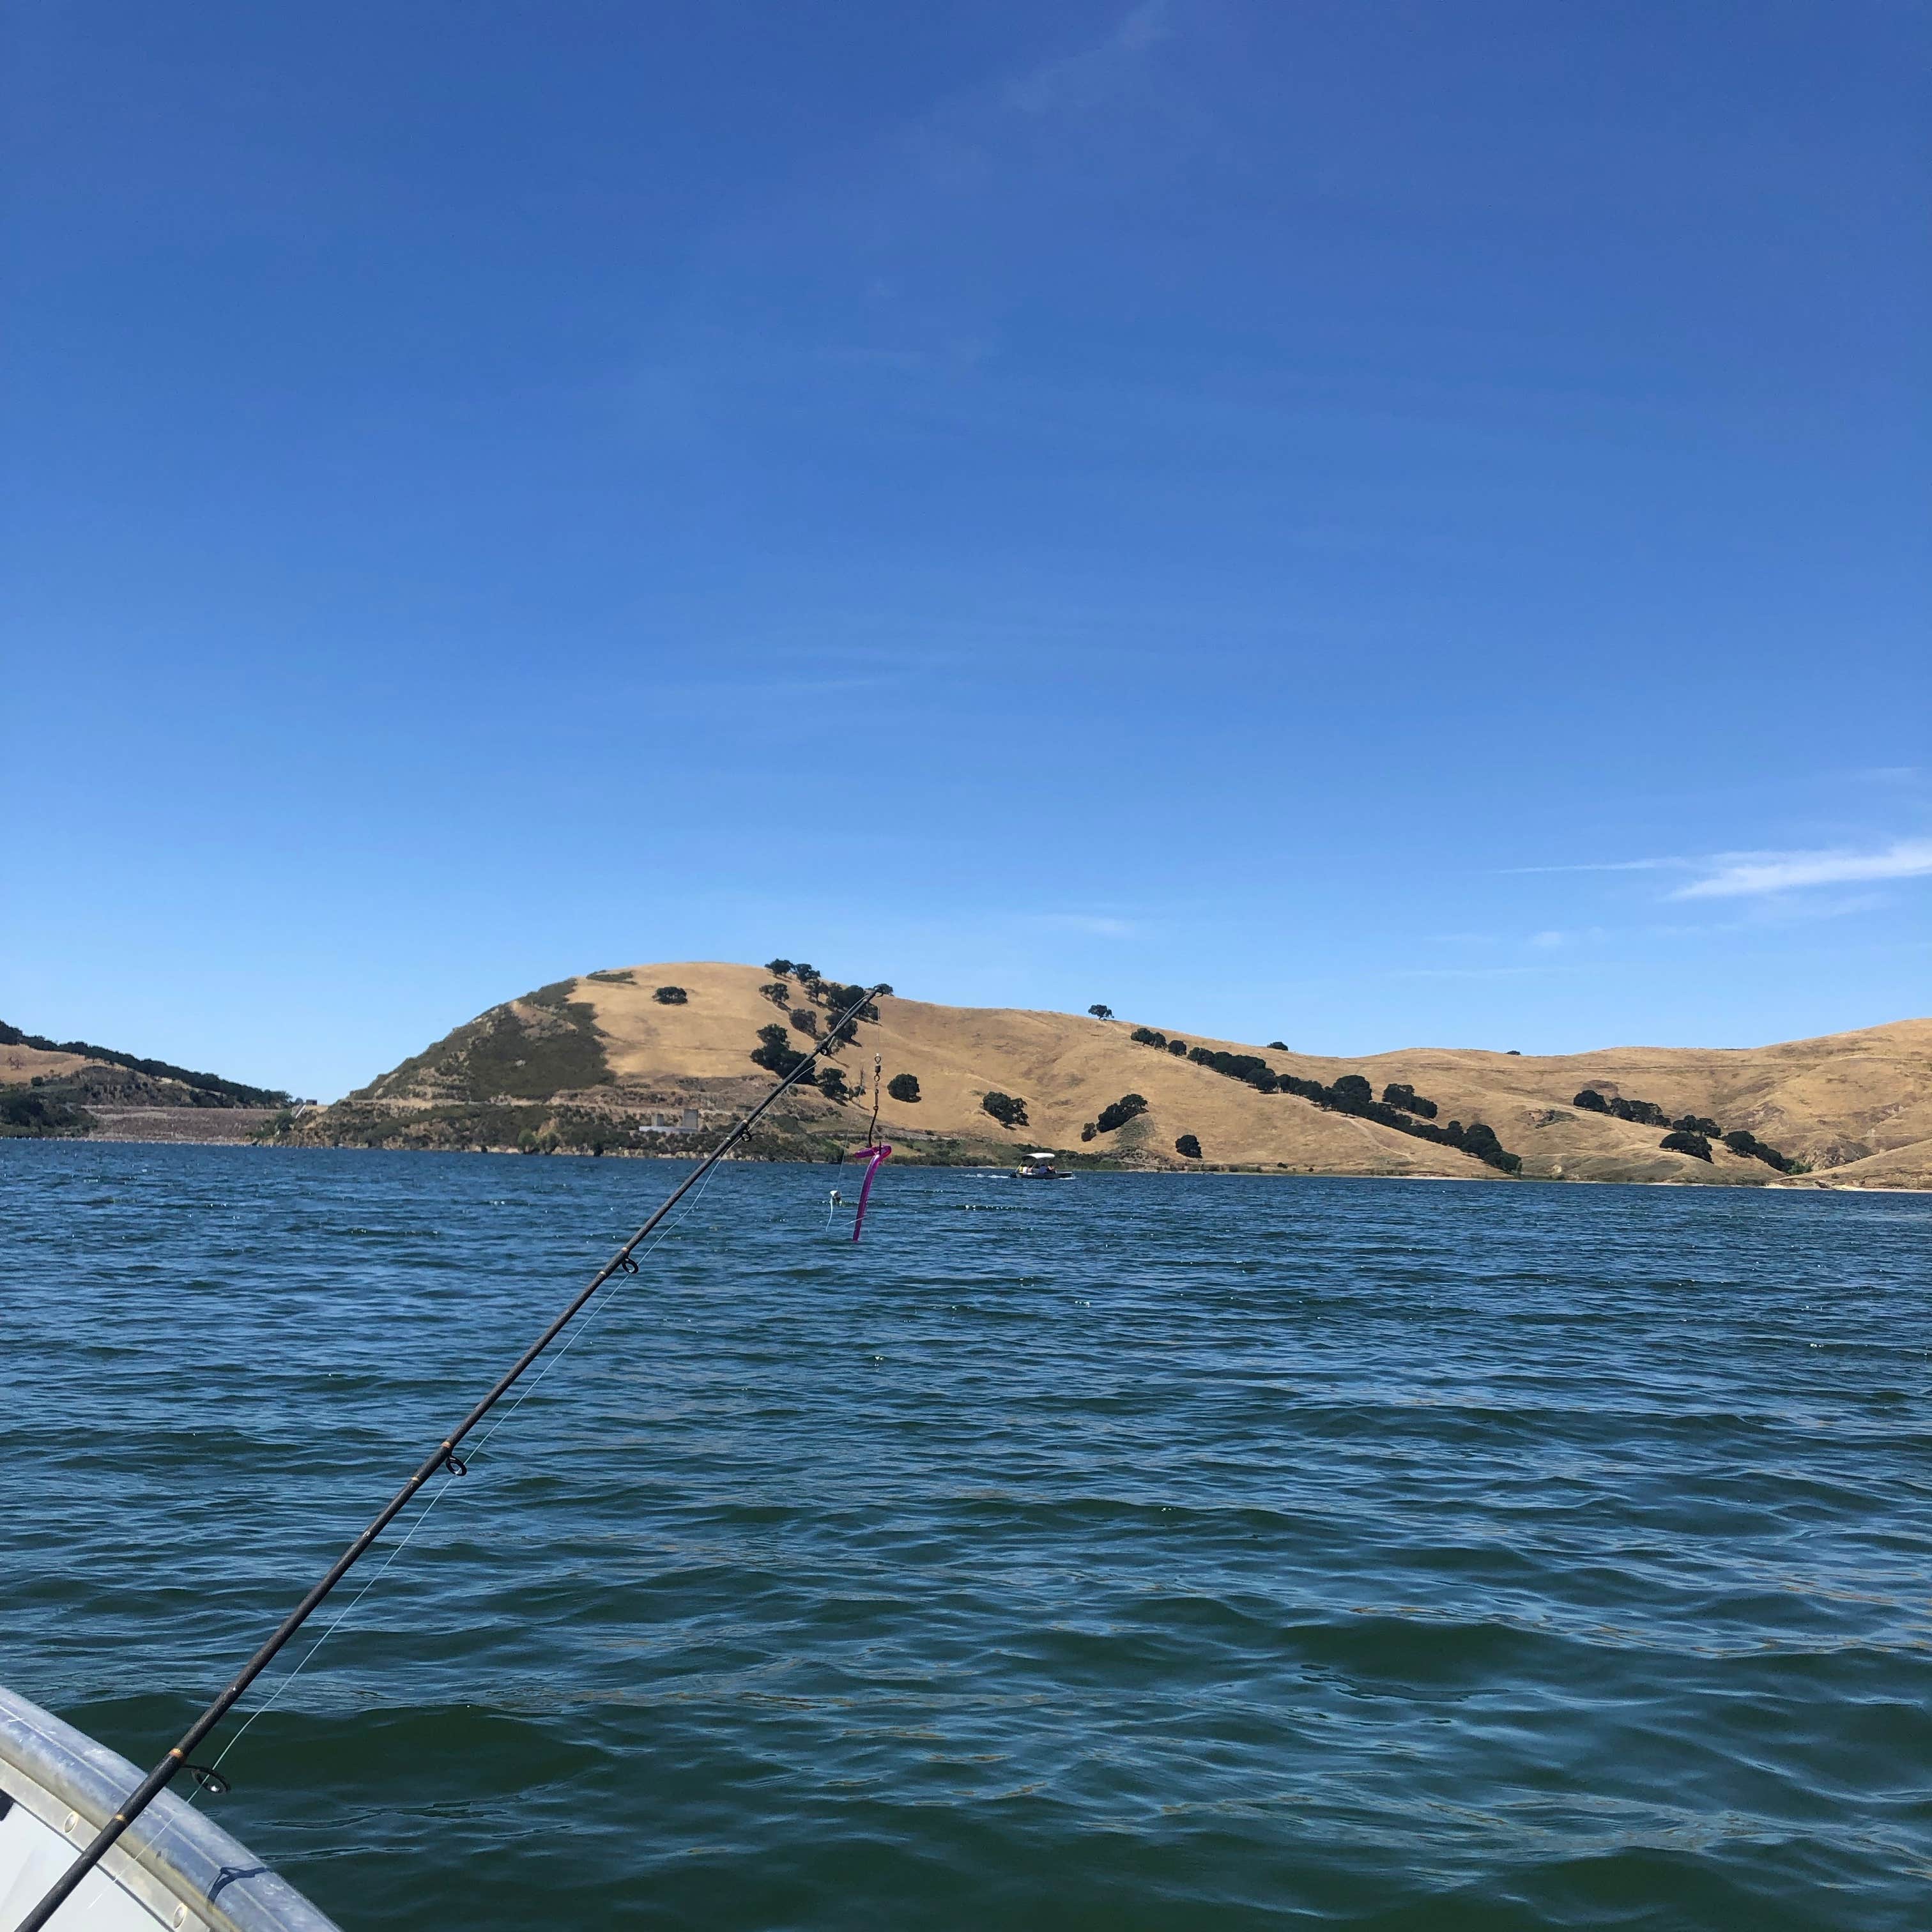 Where to go fishing with kids in the East Bay